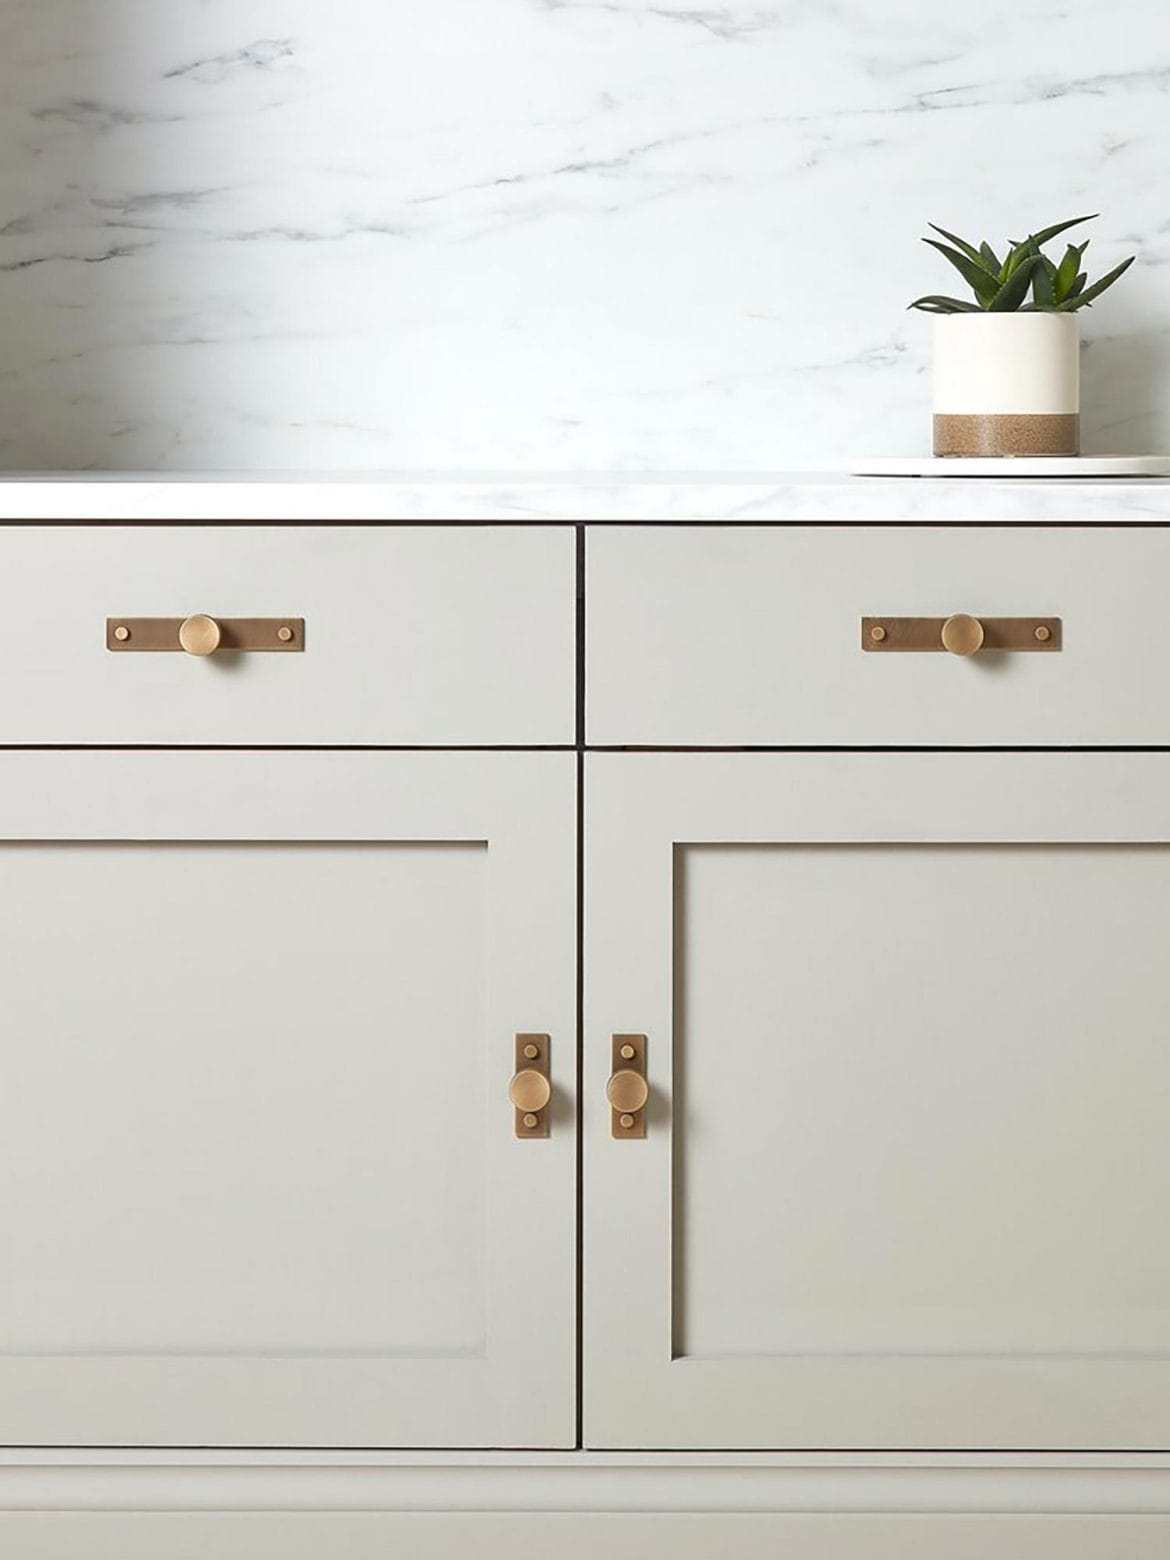 Armac Martin kitchen handles by Hubble